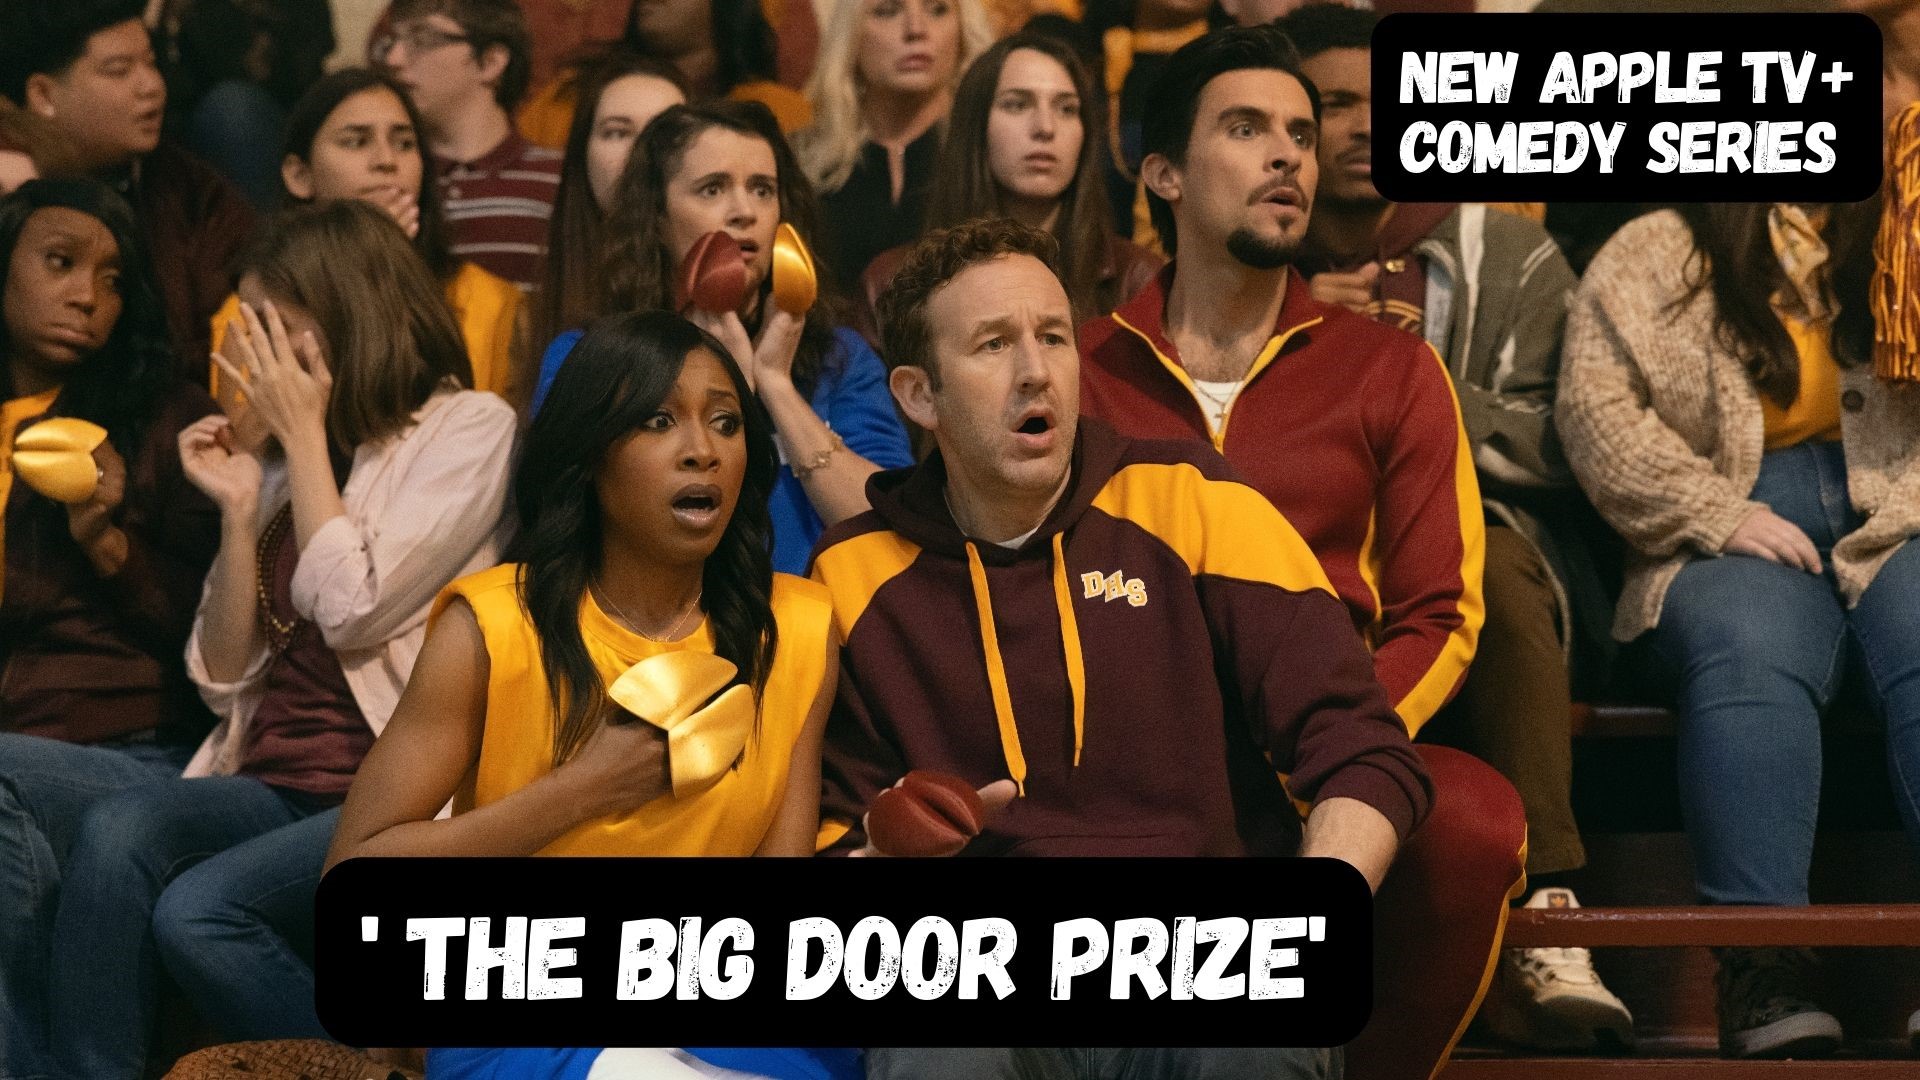 A one-on-one interview with Chris O'Dowd and Josh Segarra about ‘The Big Door Prize’ on Apple TV+.